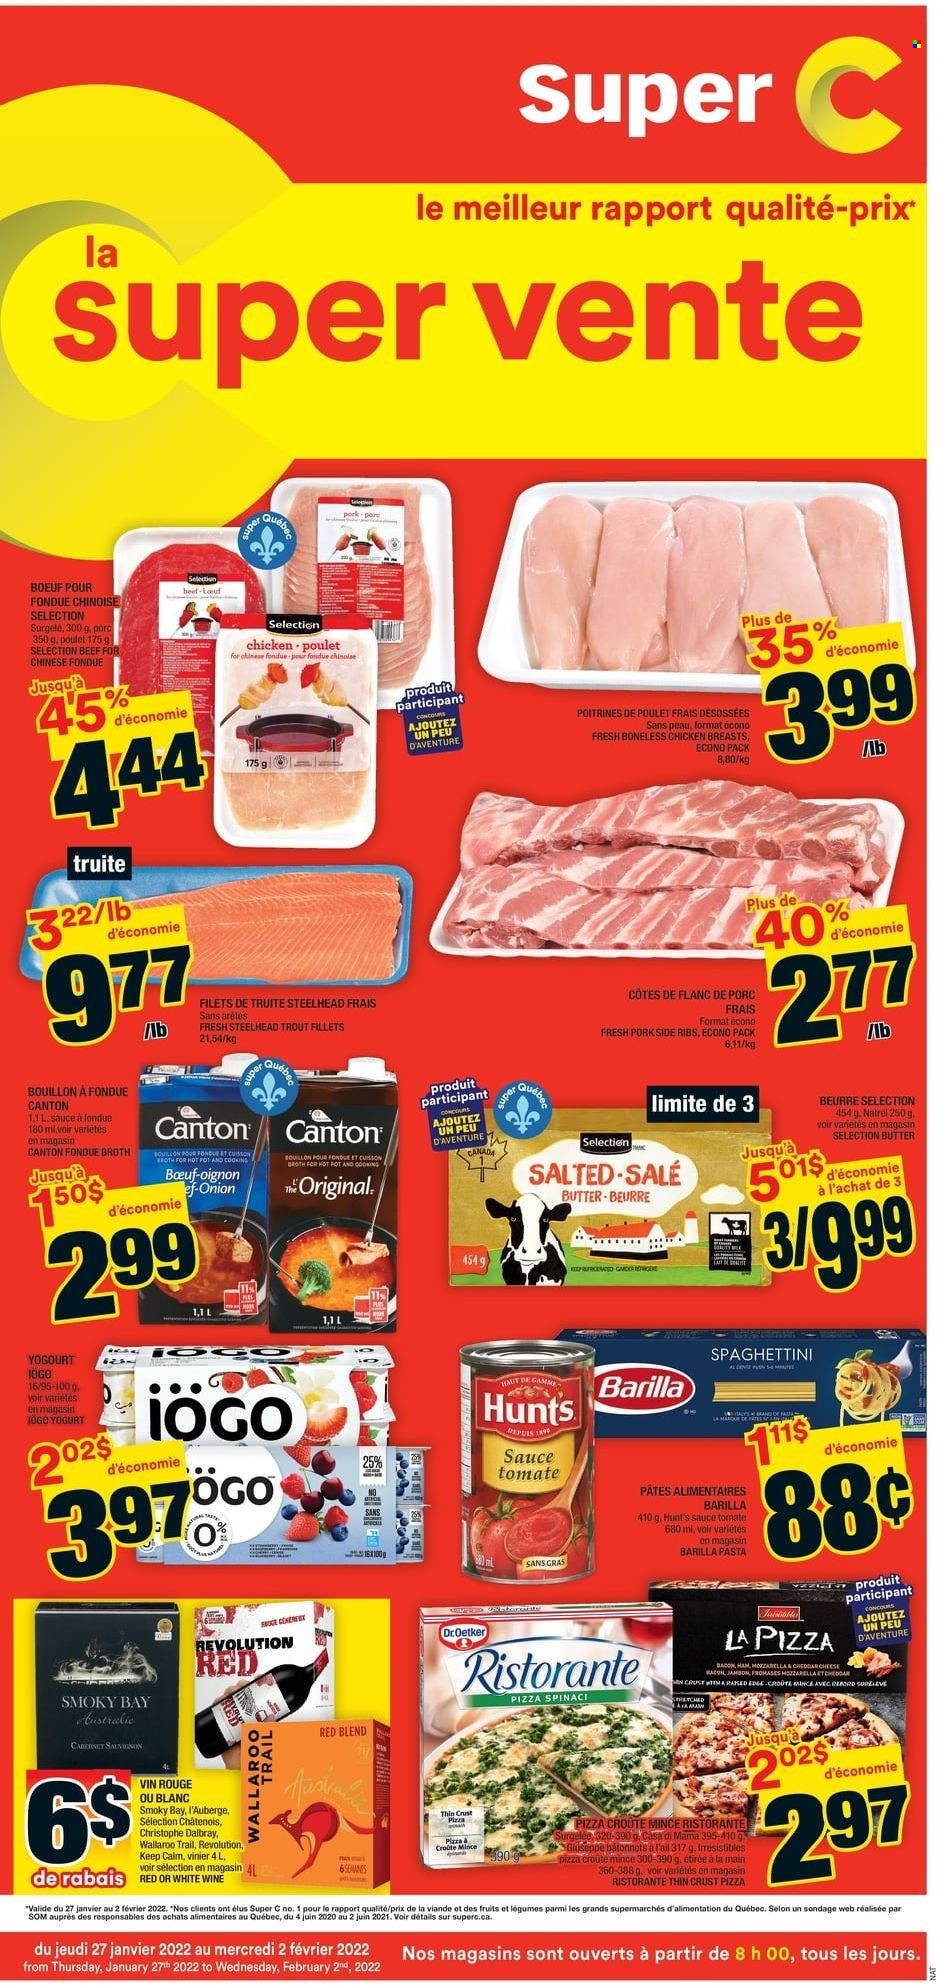 thumbnail - Super C Flyer - January 27, 2022 - February 02, 2022 - Sales products - onion, trout, pizza, pasta, sauce, bacon, ham, yoghurt, butter, bouillon, broth, chicken breasts, Barilla. Page 1.